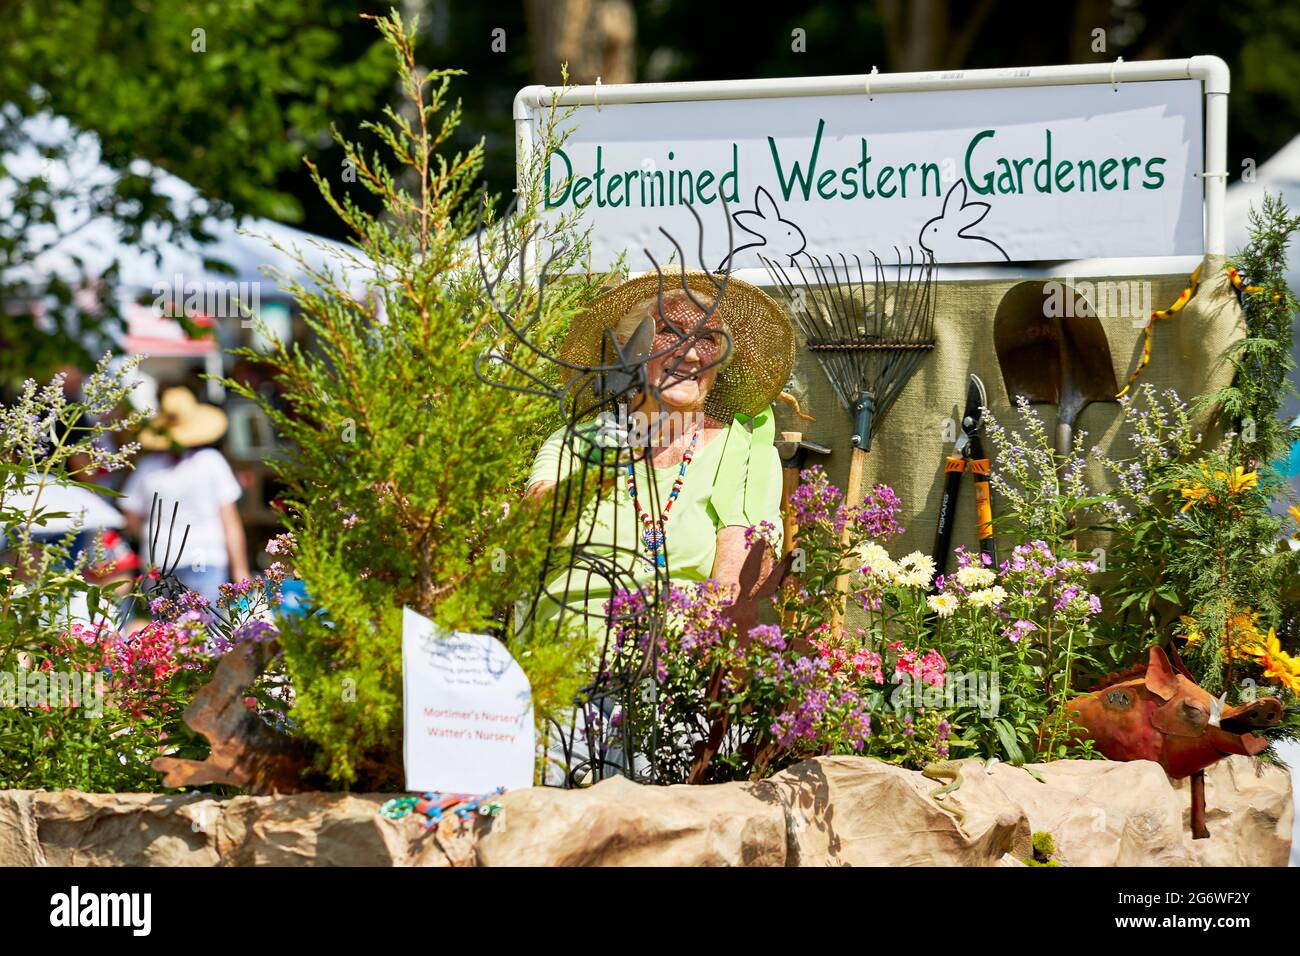 Prescott, Arizona, USA - July 3, 2021: Woman riding on the Determined Western Gardeners float surrounded by plants in 4th of July parade Stock Photo